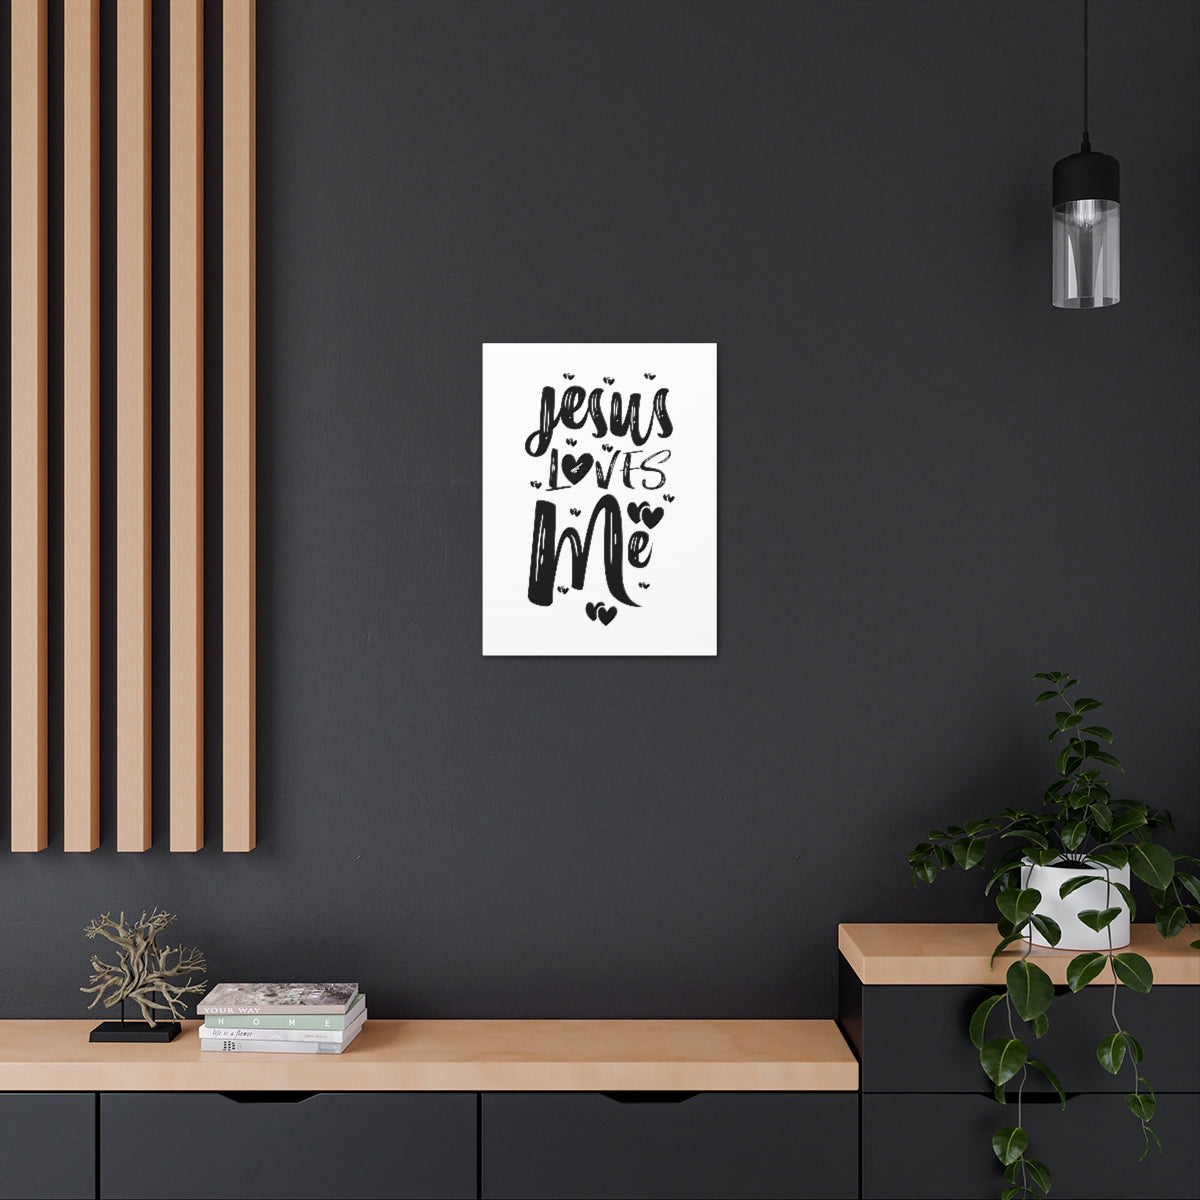 Scripture Walls Jesus Loves Me 1 John 4:9-10 Christian Wall Art Print Ready to Hang Unframed-Express Your Love Gifts